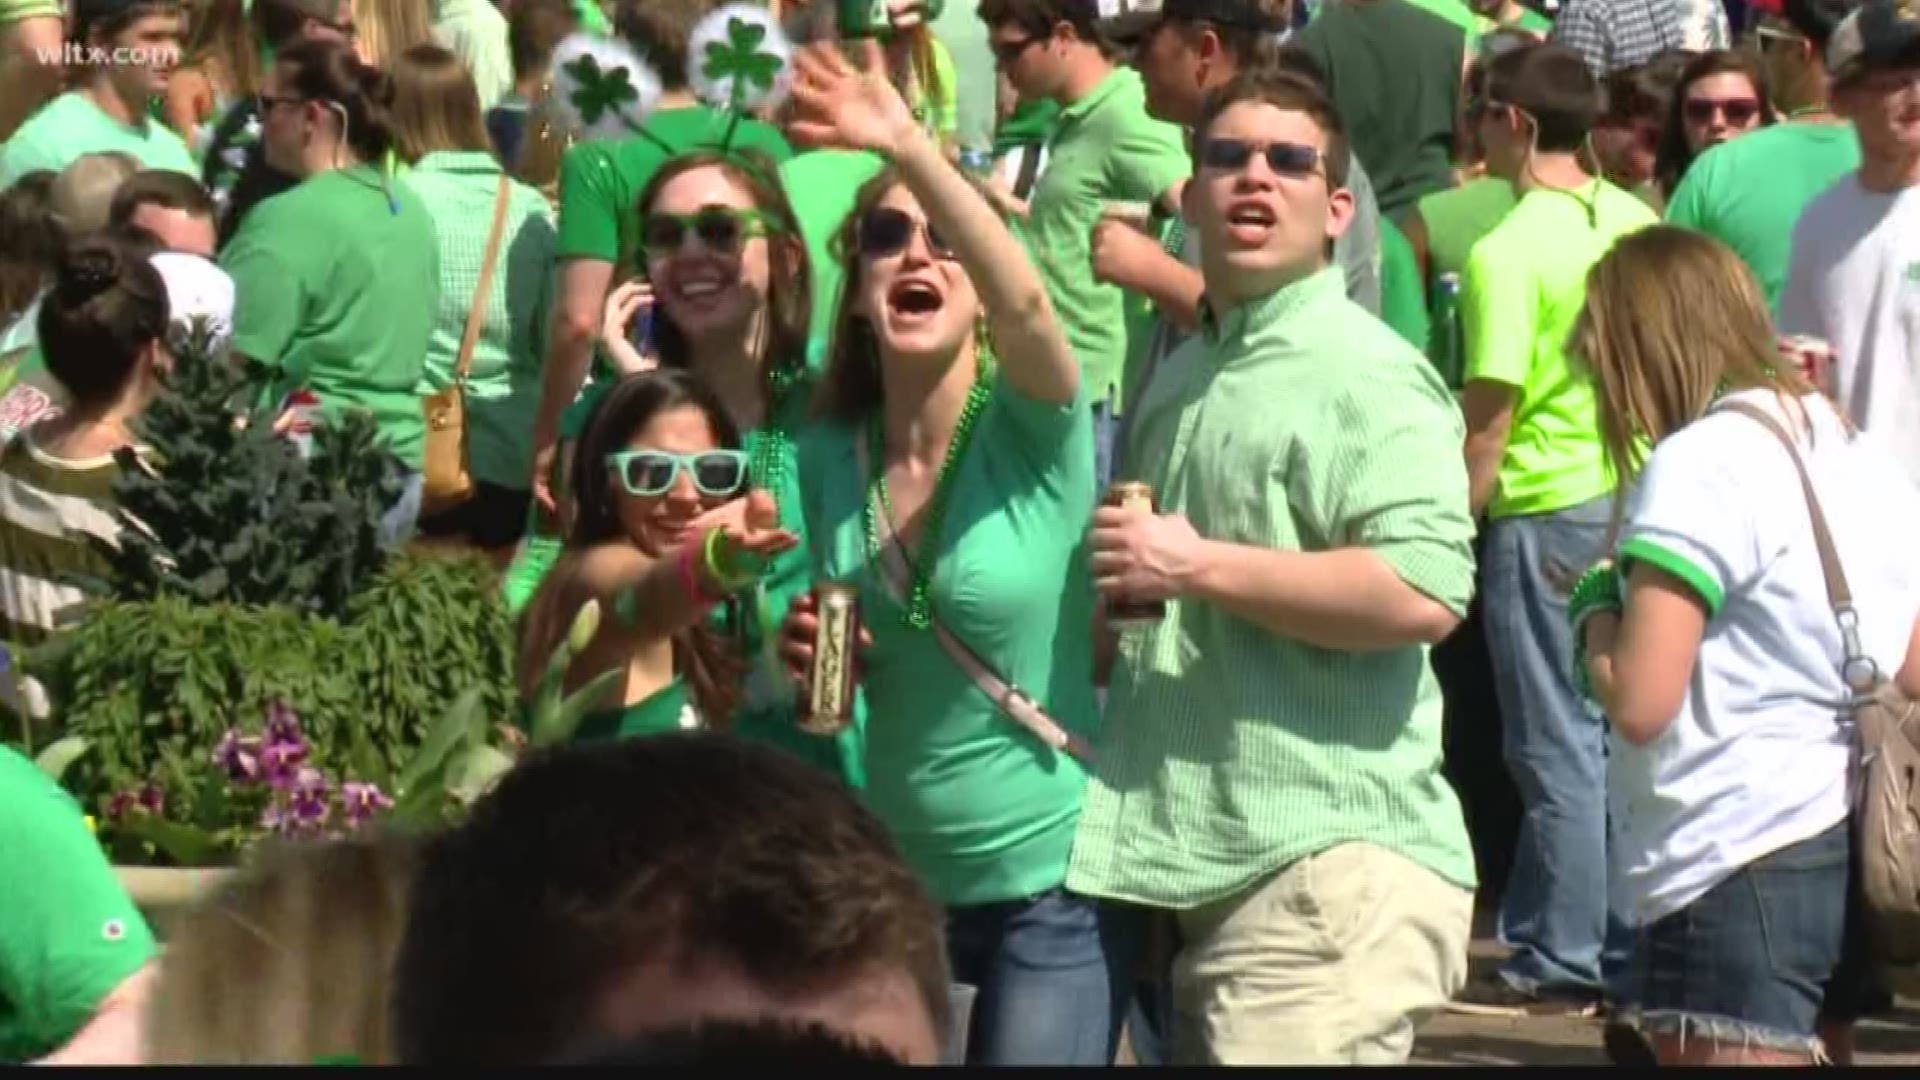 The annual St. Patrick's Day Celebration in Columbia, SC is Saturday. With all the fun, comes a few safety concerns, too.